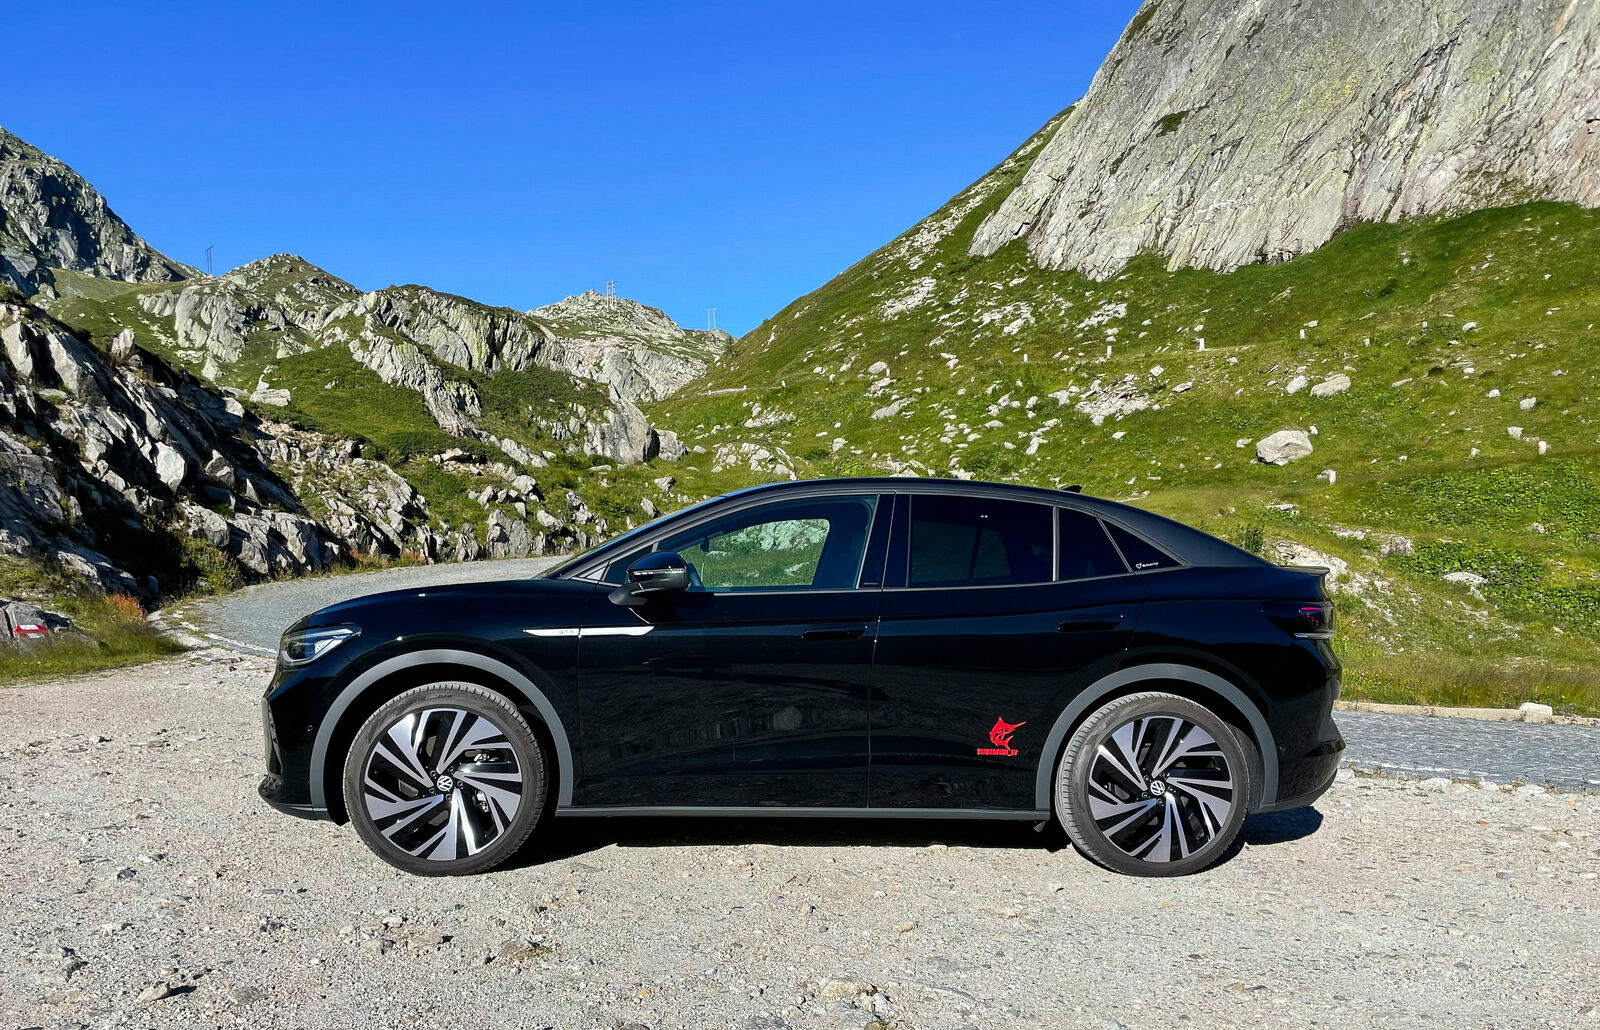 Road trip deluxe - Grand Tour of Switzerland in an e-car